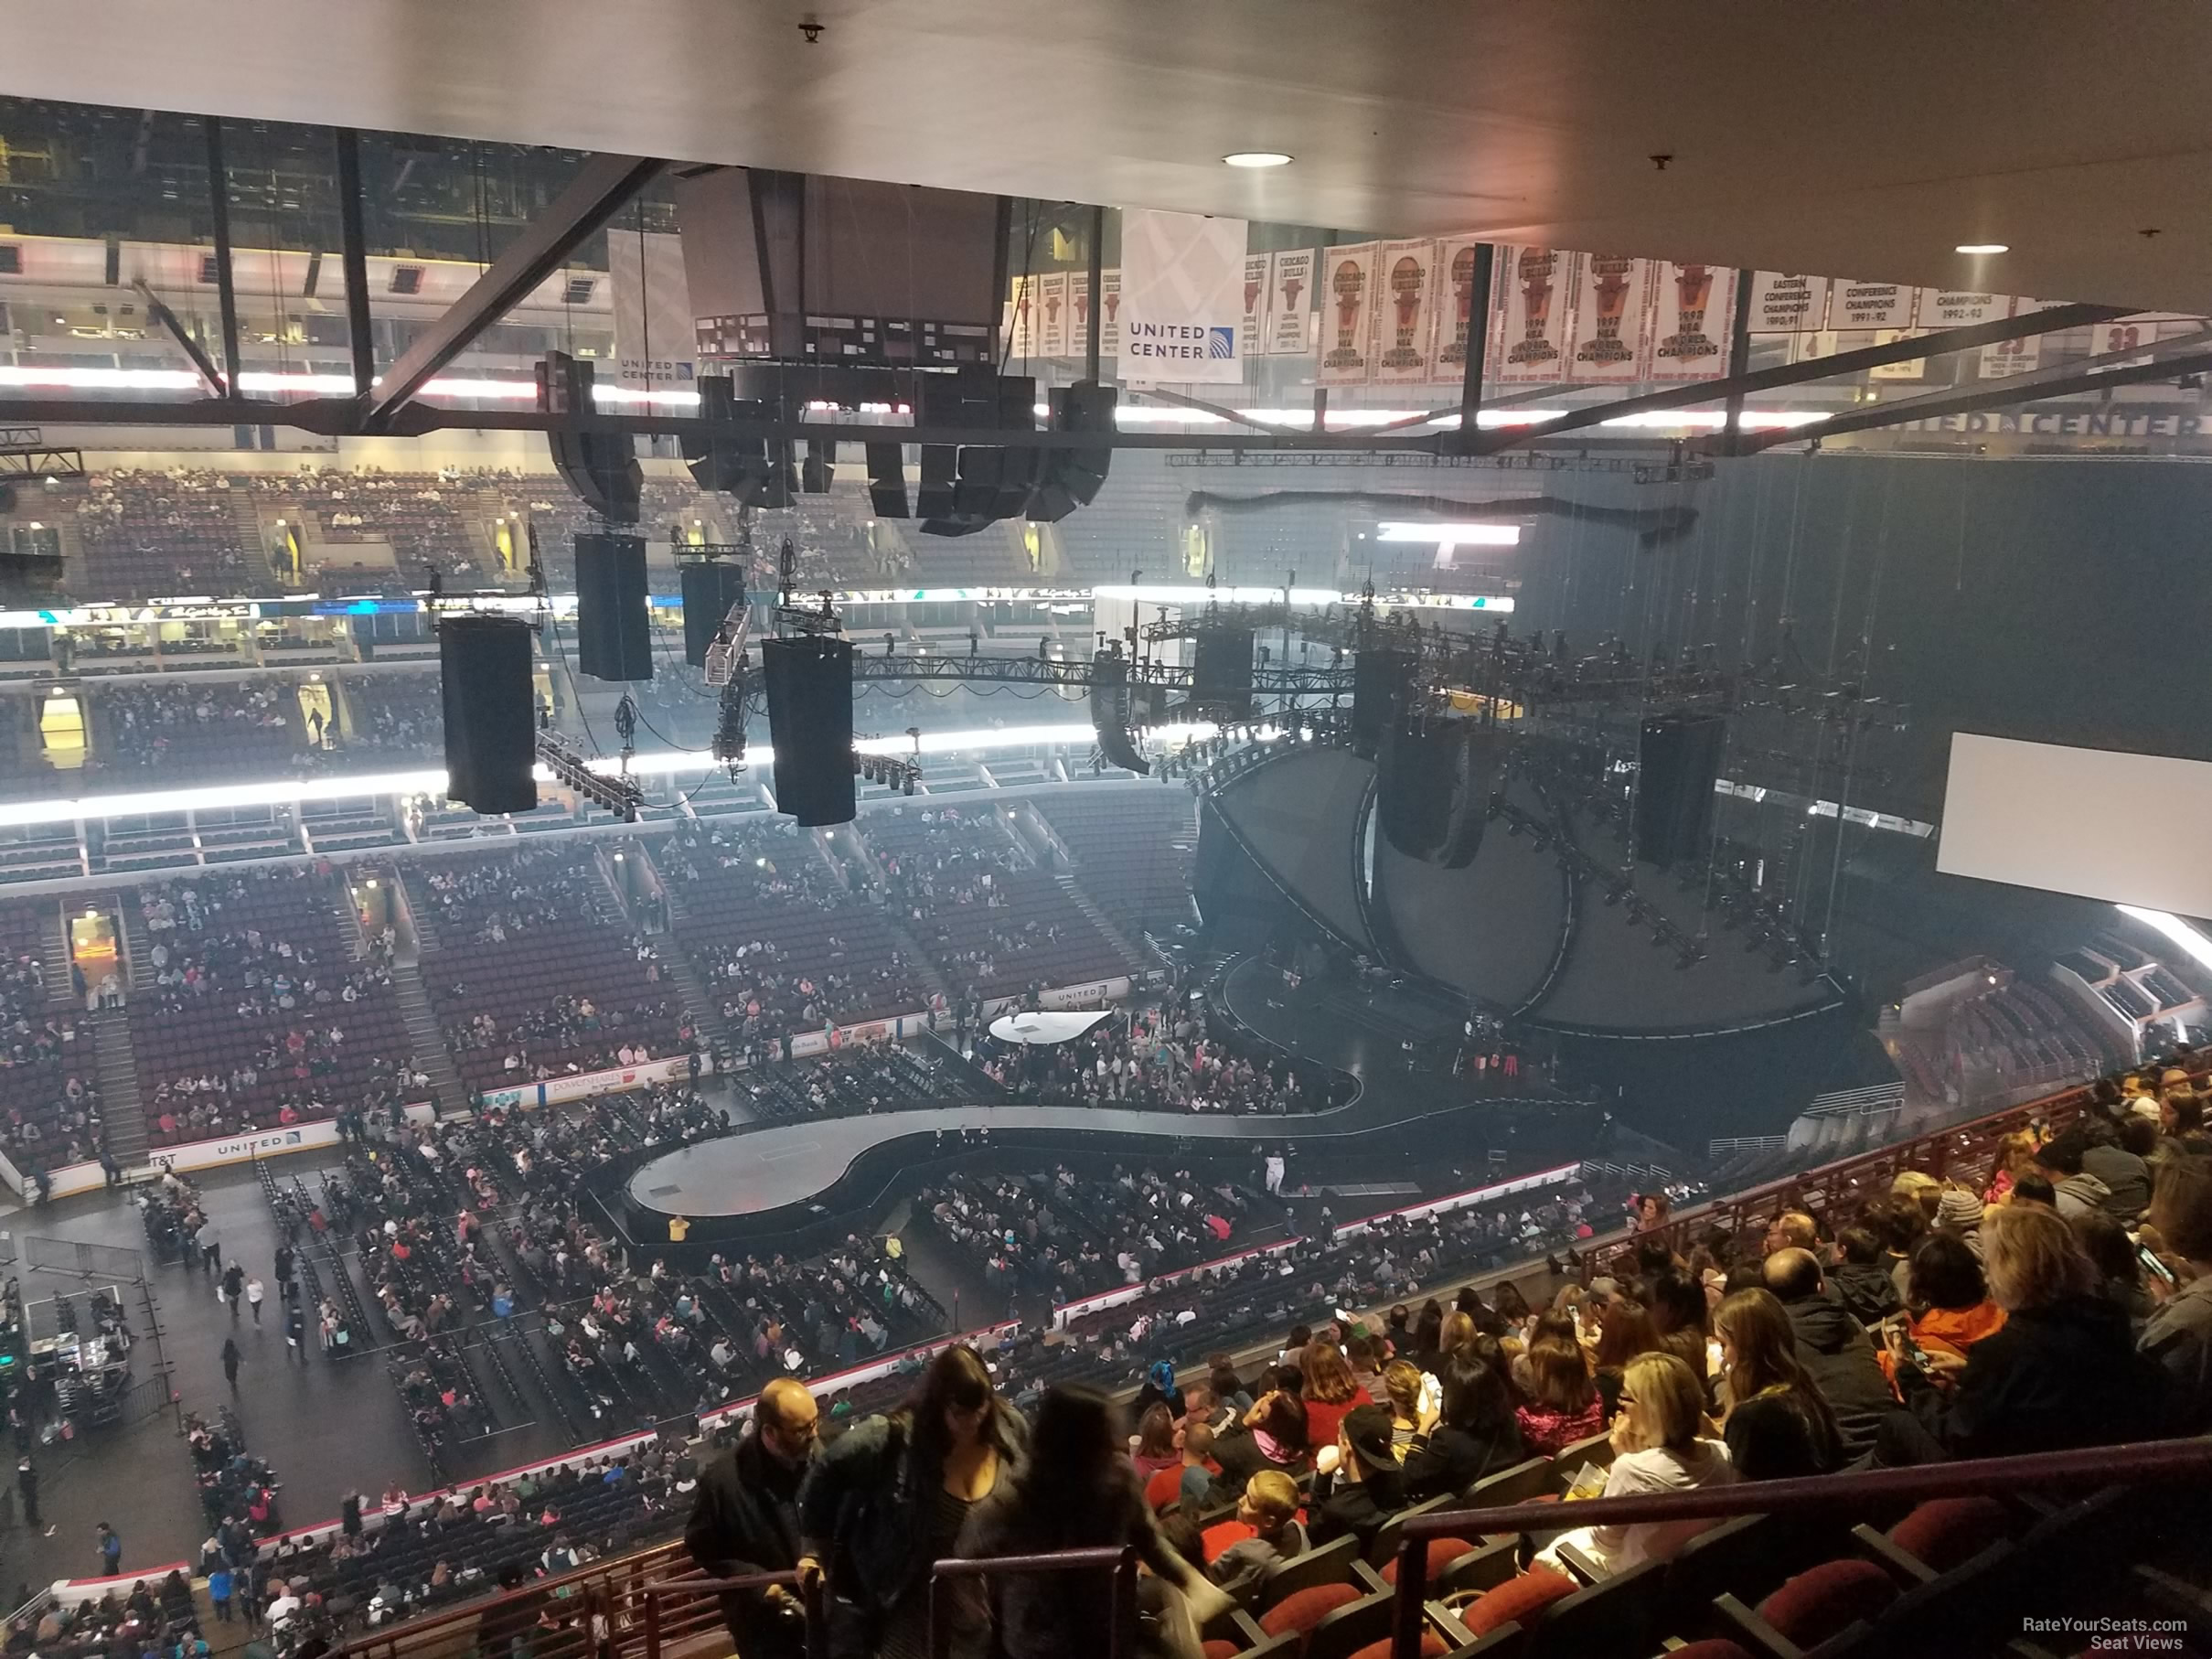 section 303, row 17 seat view  for concert - united center